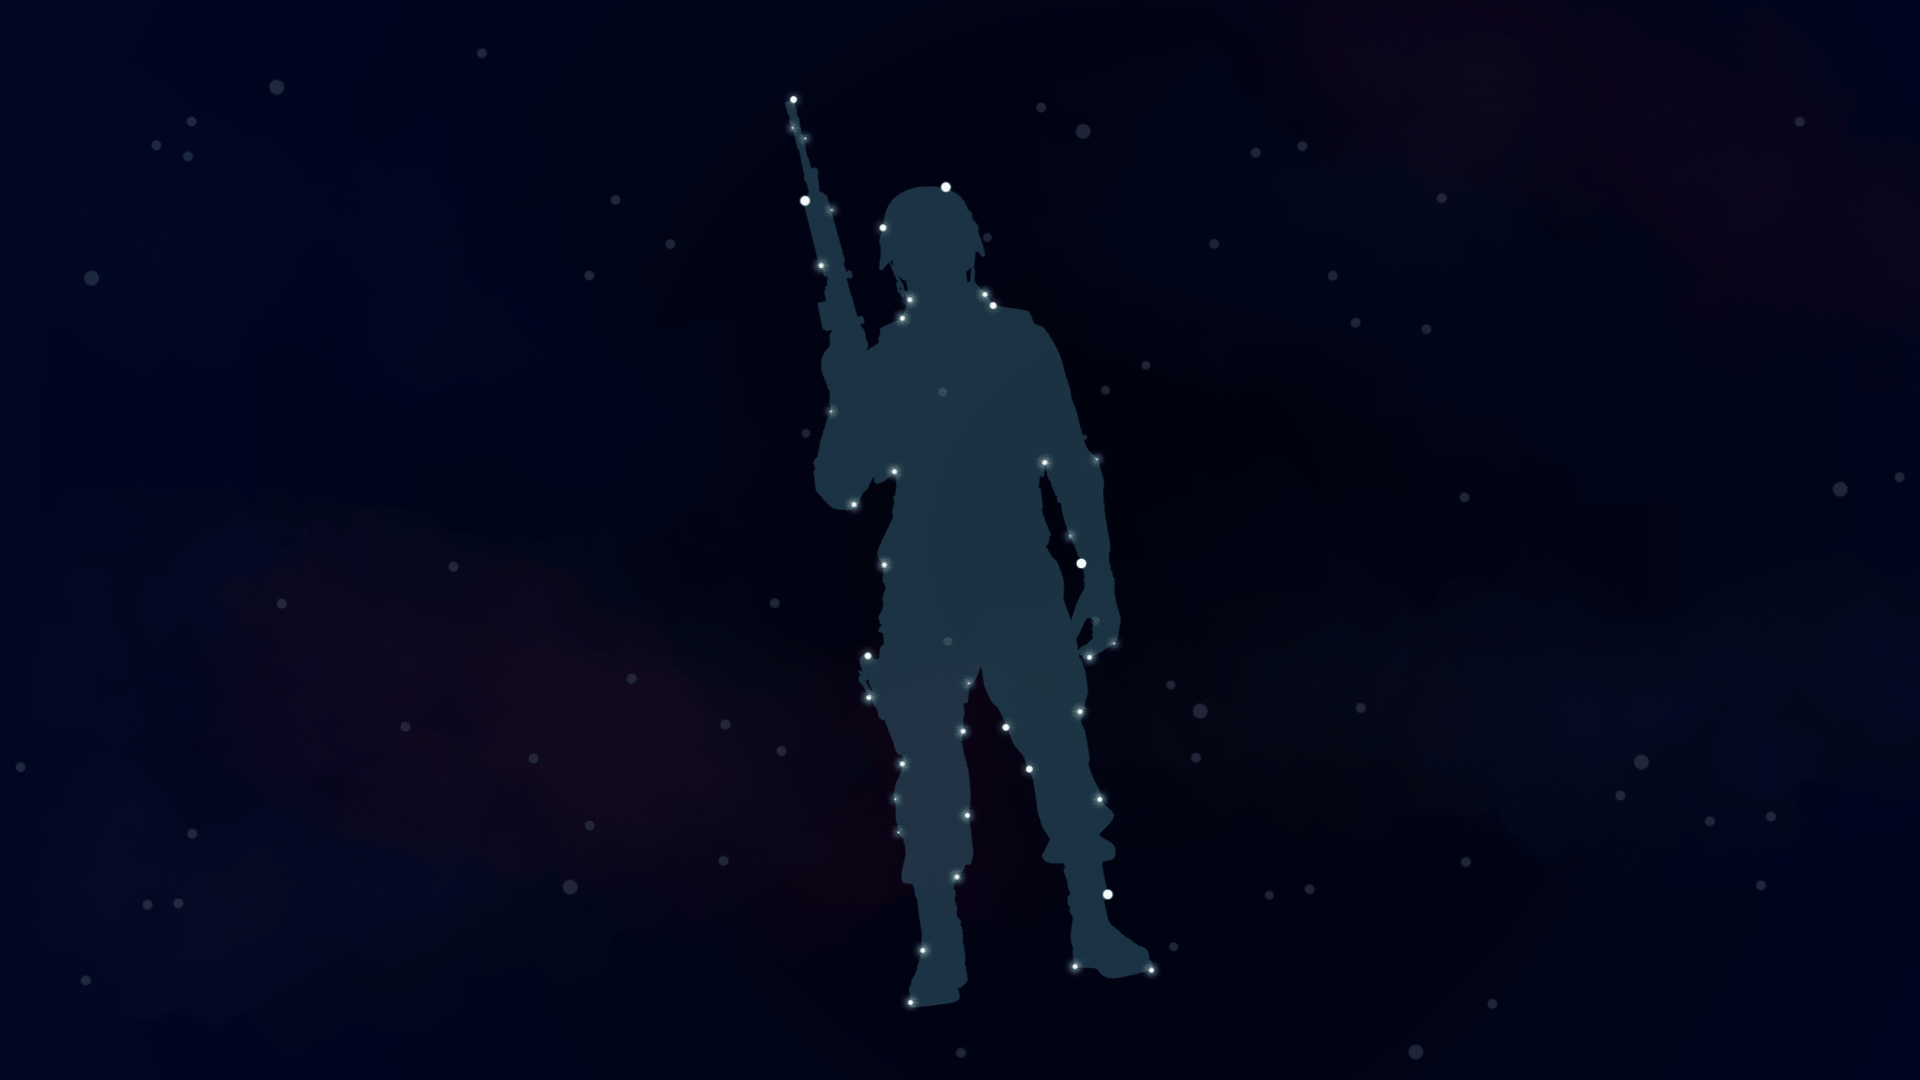 The silhouette of a soldier outlined in stars